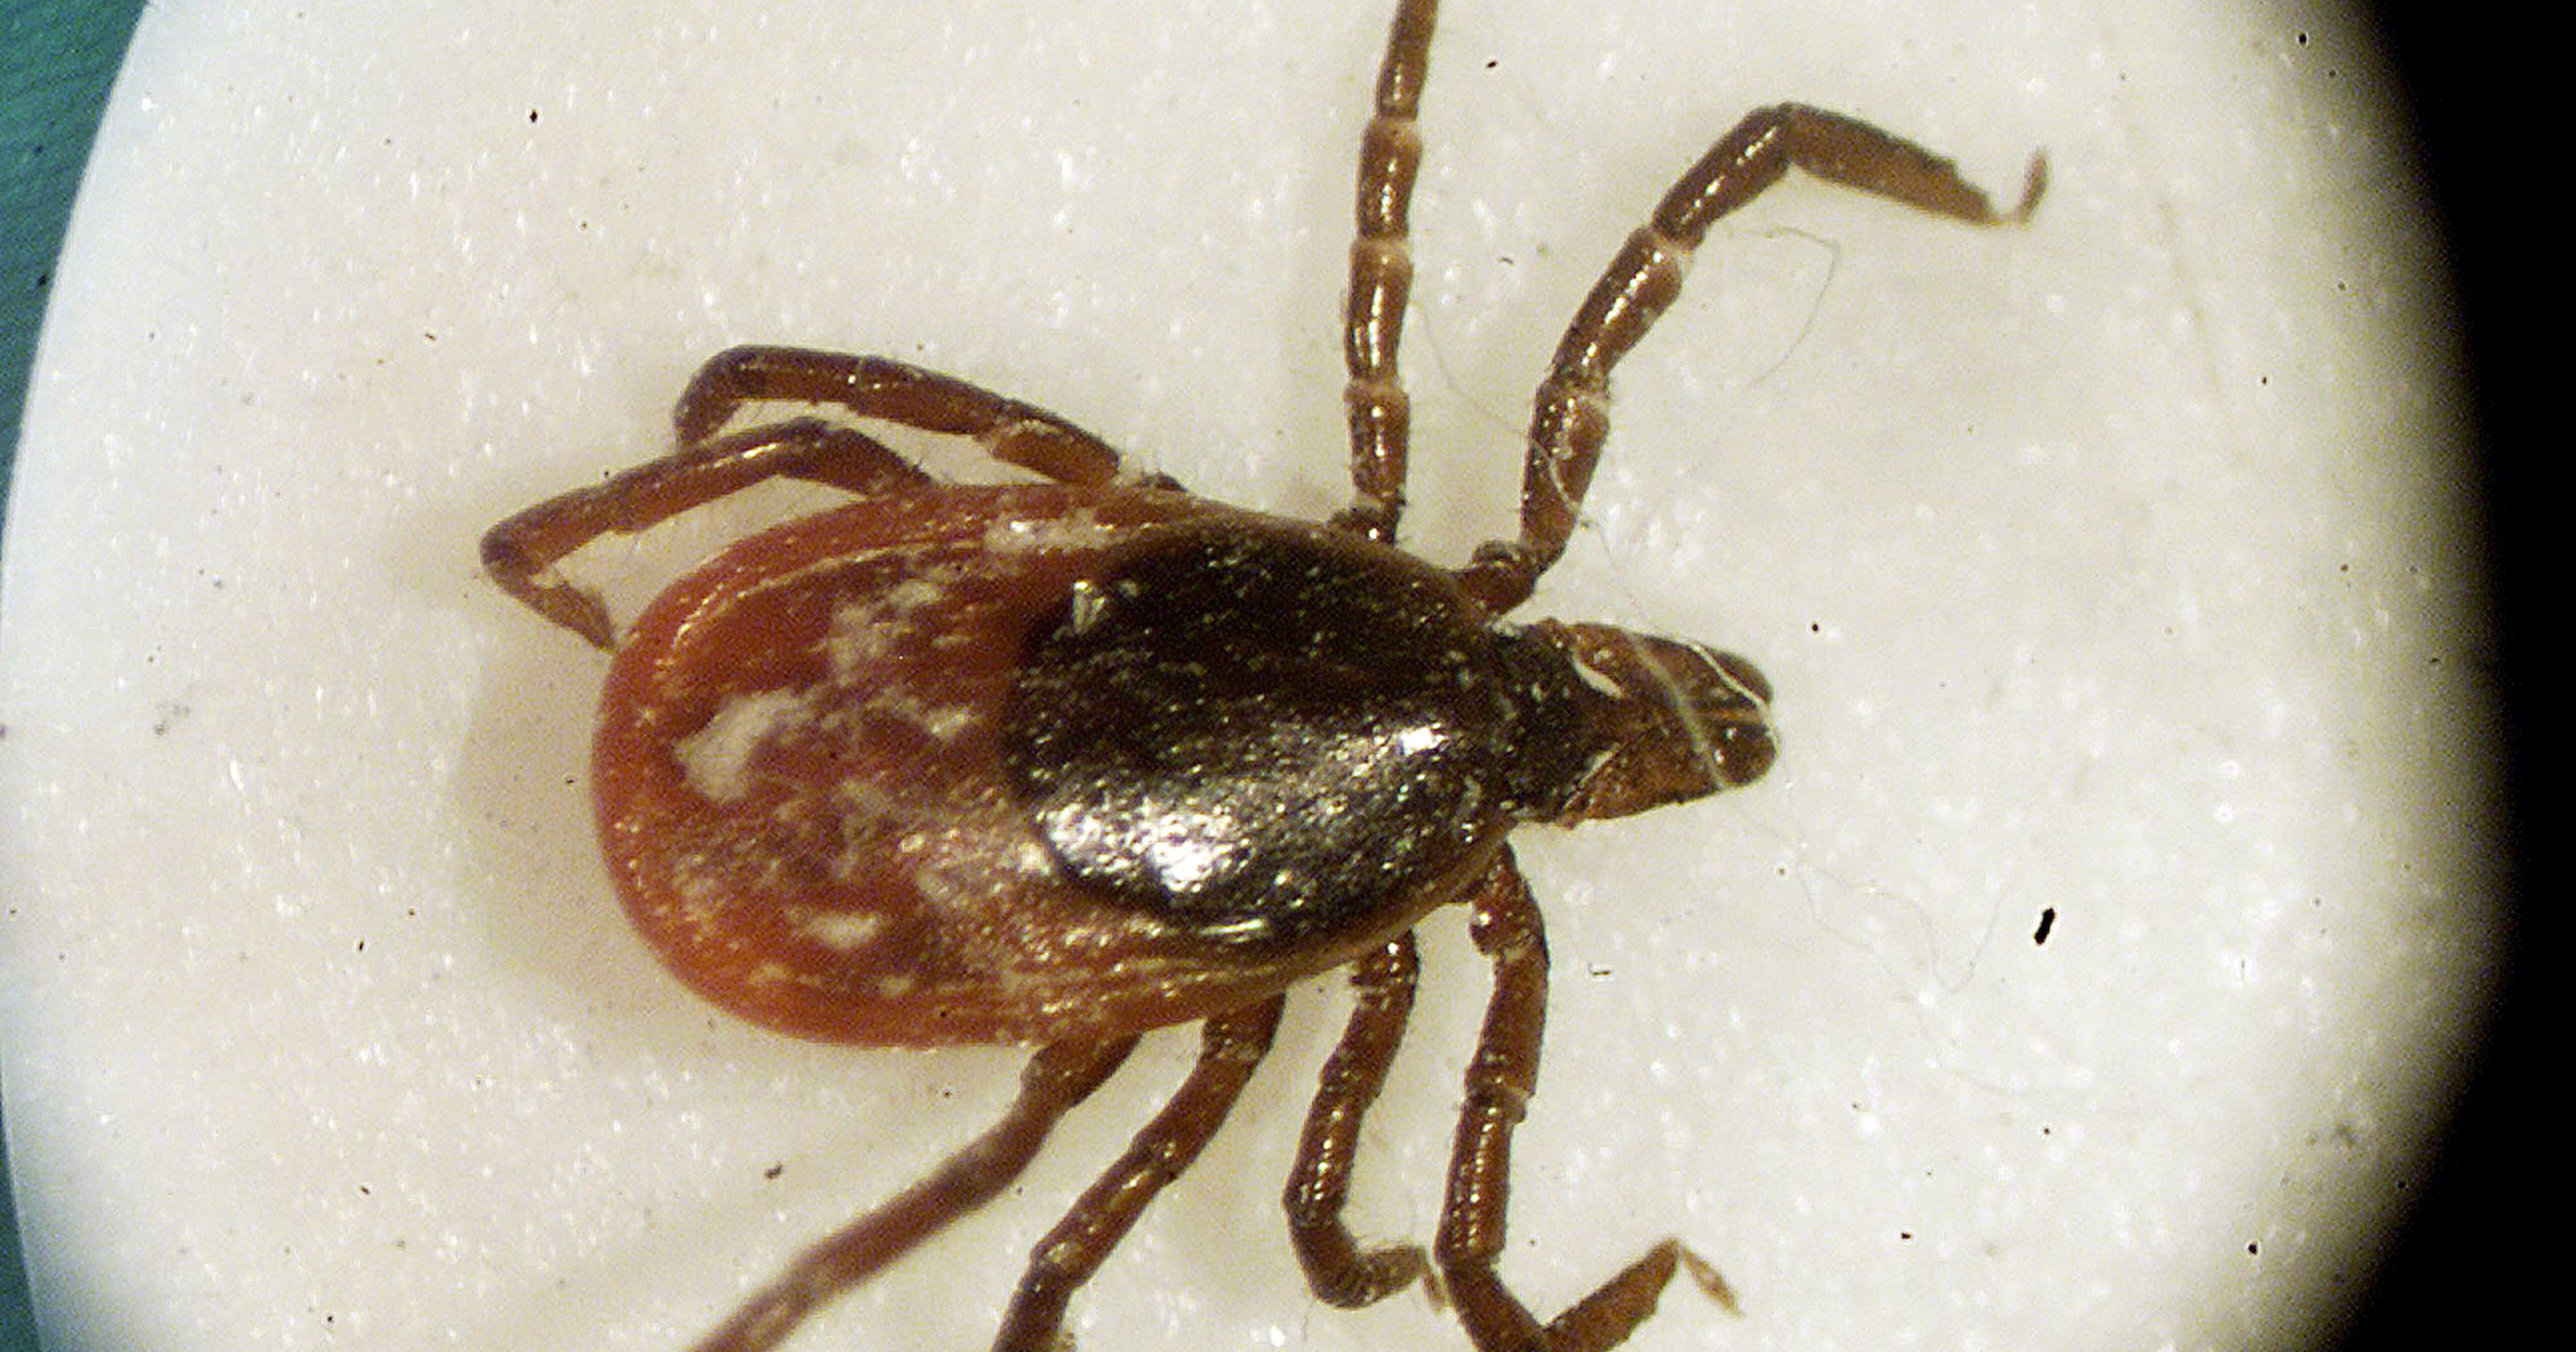 Outdoors enthusiasts urged to prevent tick bites